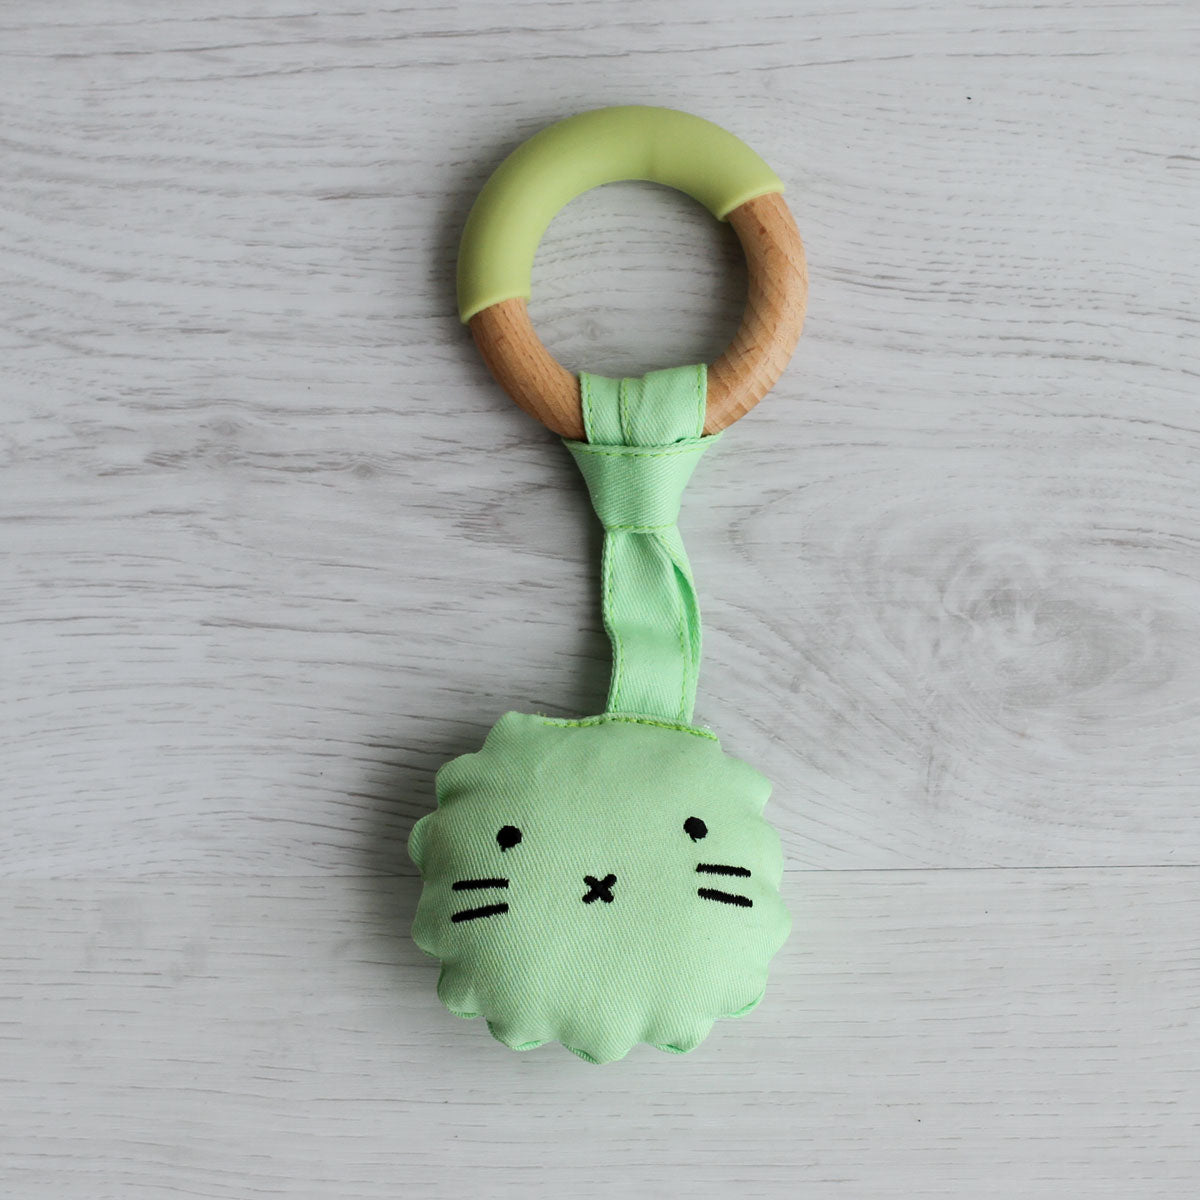 Wood Plush Rattle Teether Toy - Green